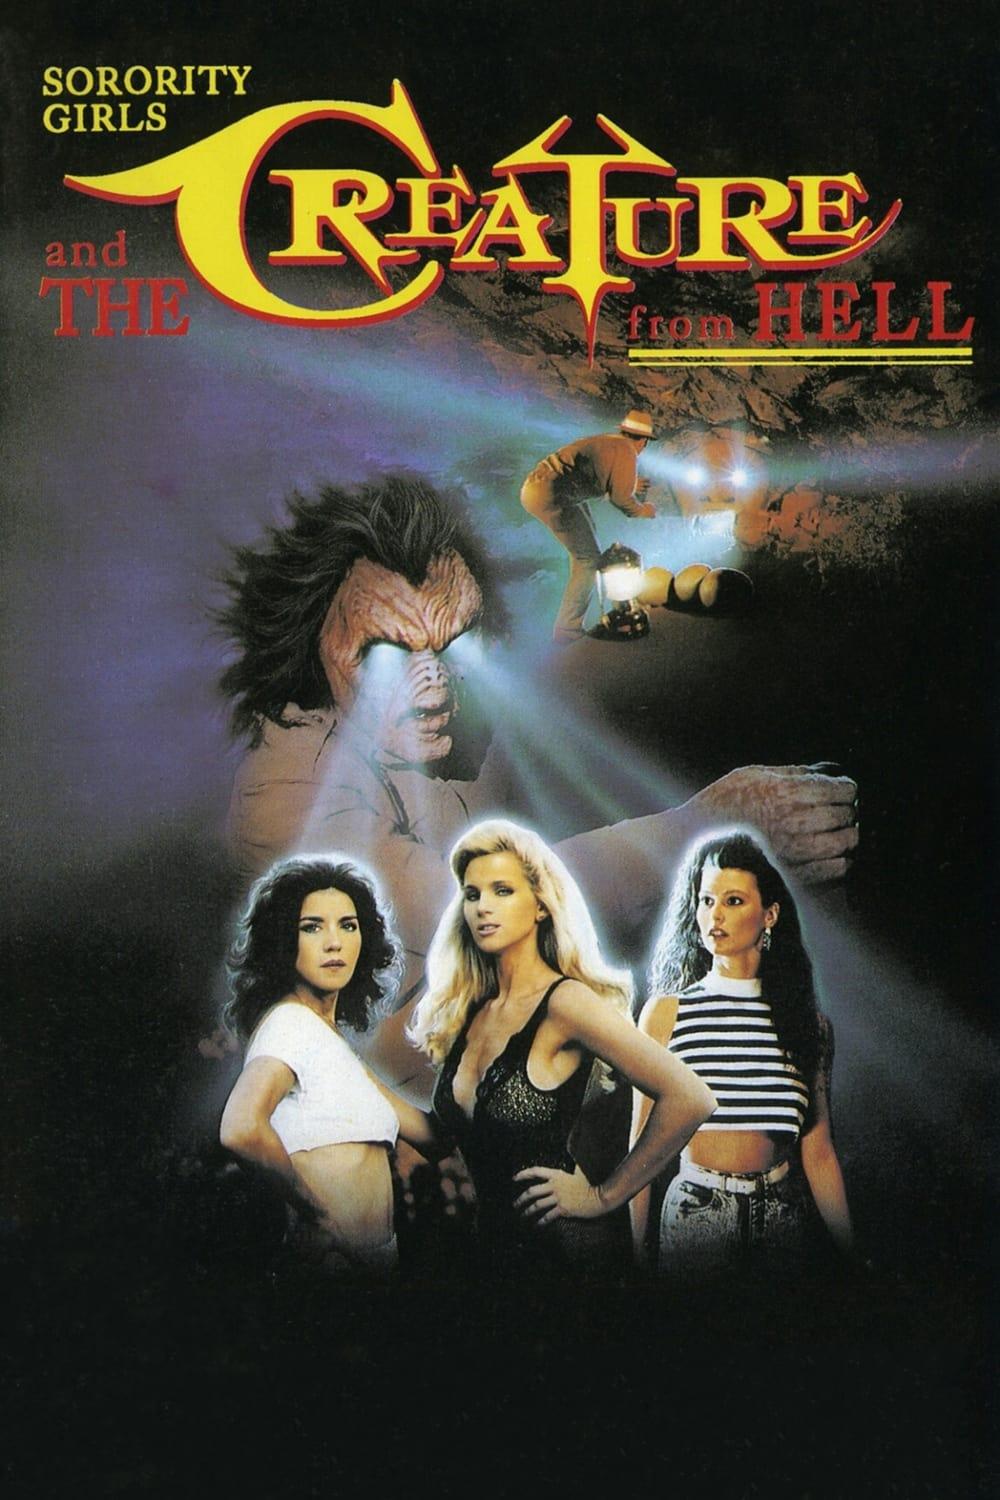 Sorority Girls and the Creature from Hell poster